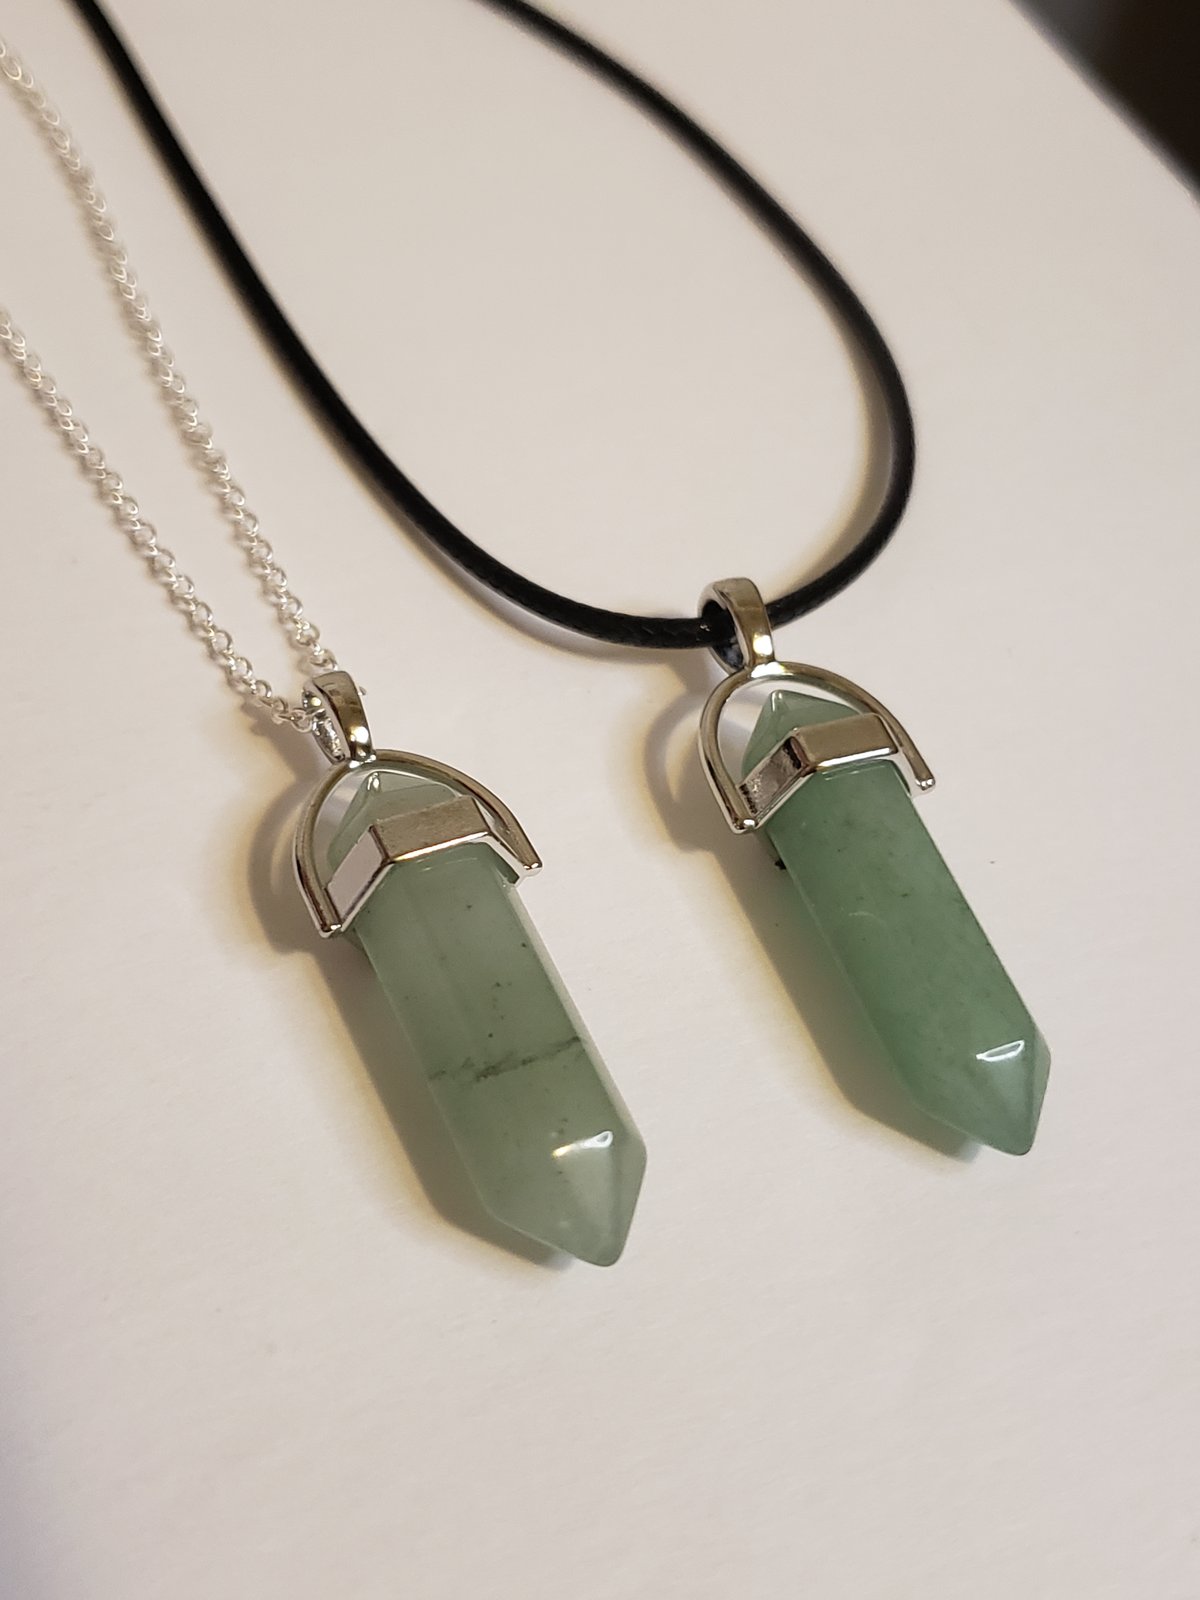 Jade Crystal Pendant Charm Necklace With 18K Gold Plated Chain Green  Gemstone | eBay